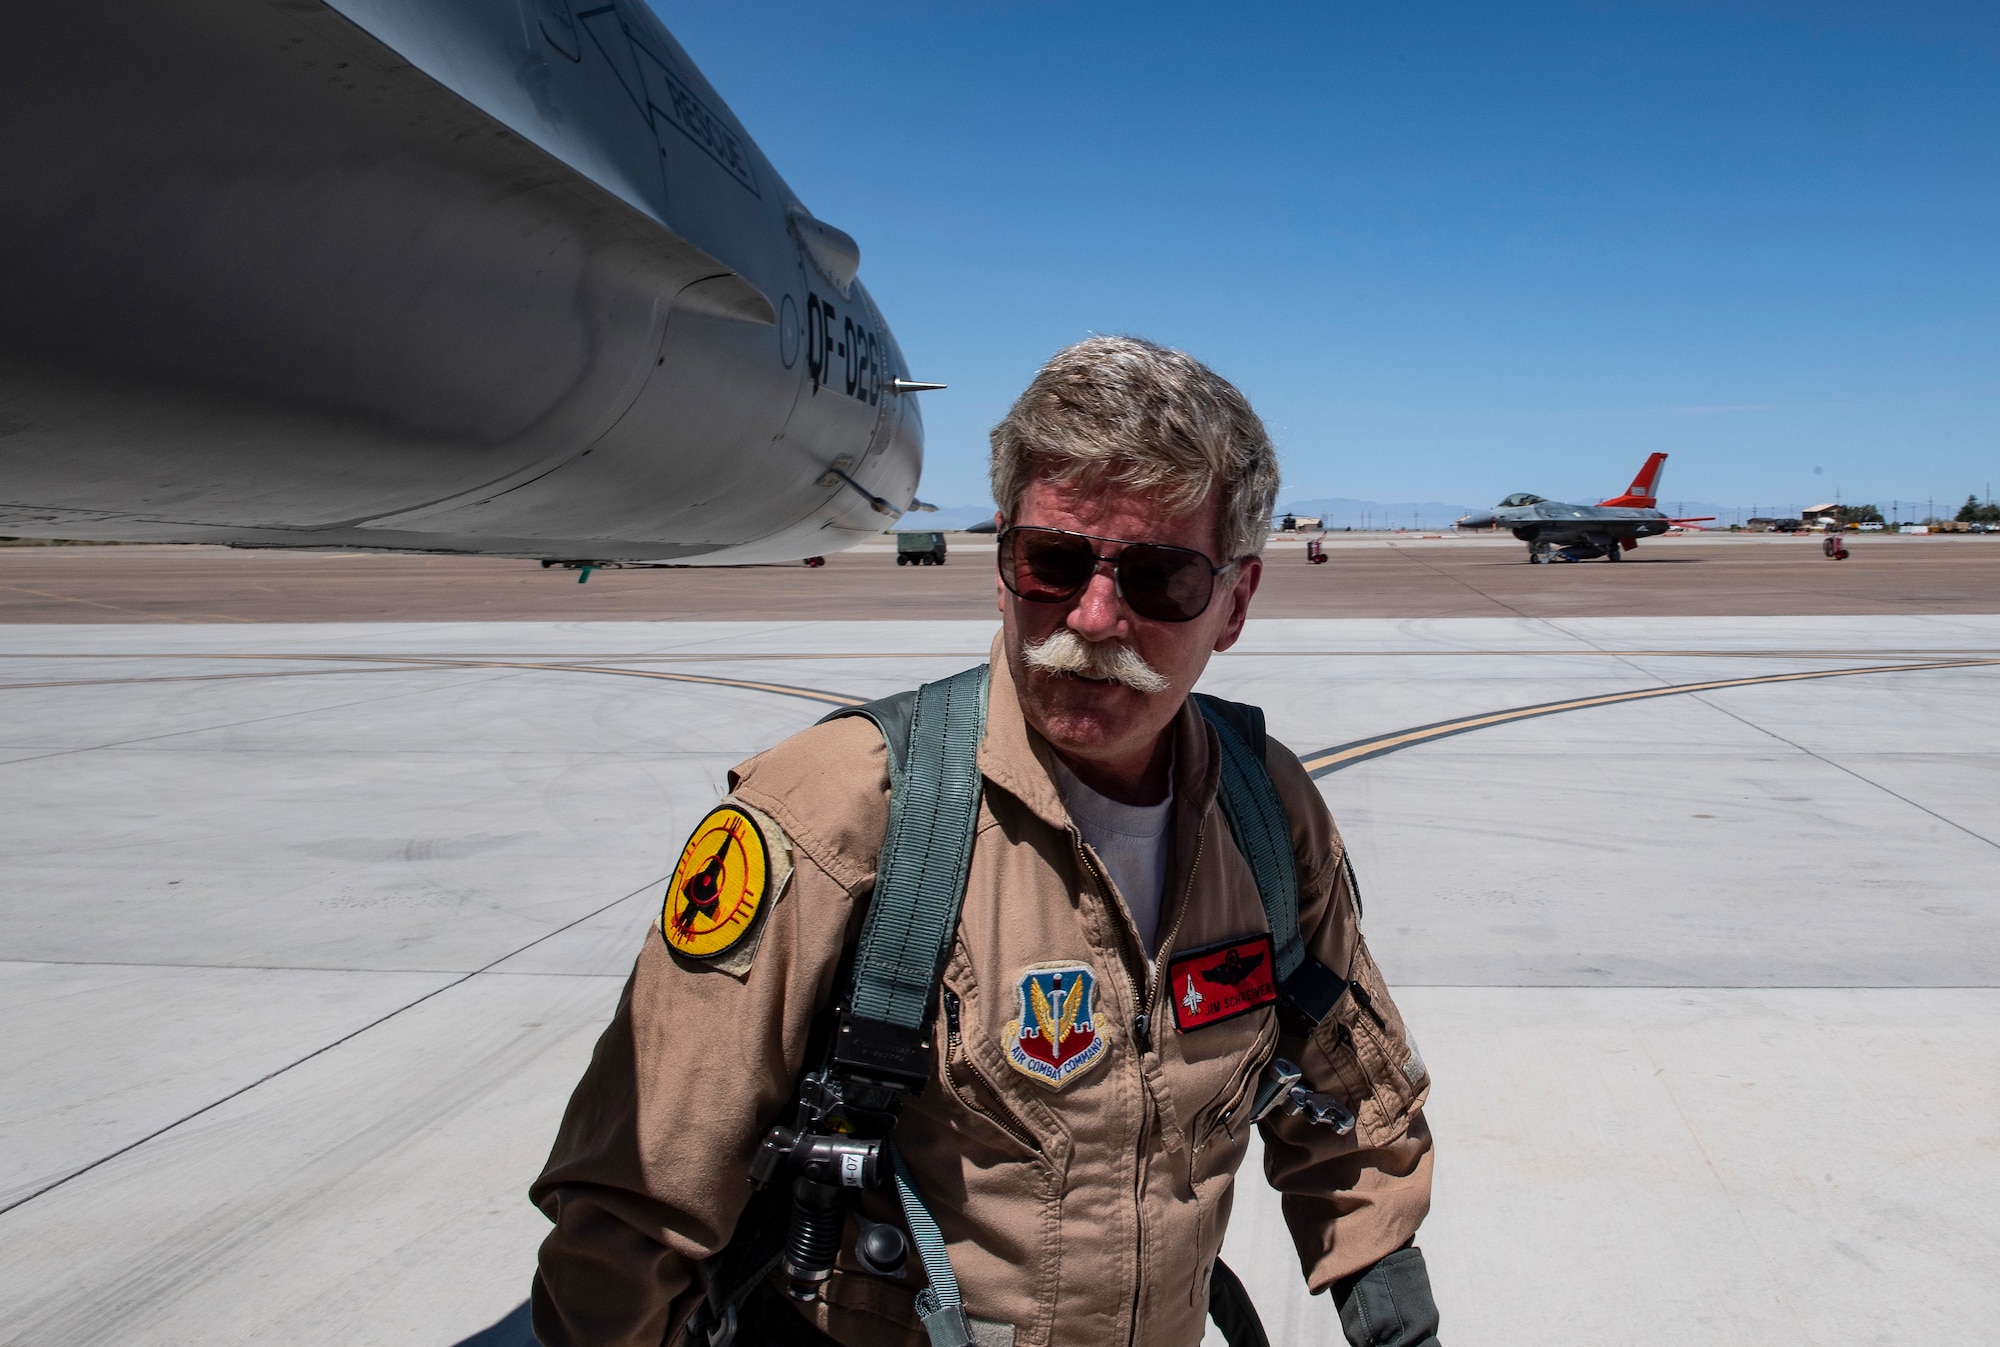 Jim Schreiner, Civilian QF-16 pilot/controller, preflights a QF-16 before a manned dress rehearsal of a missile test on a QF-16 at Holloman Air Force Base, New Mexico. (U.S. Air Force photo by Tech. Sgt. Perry Aston)